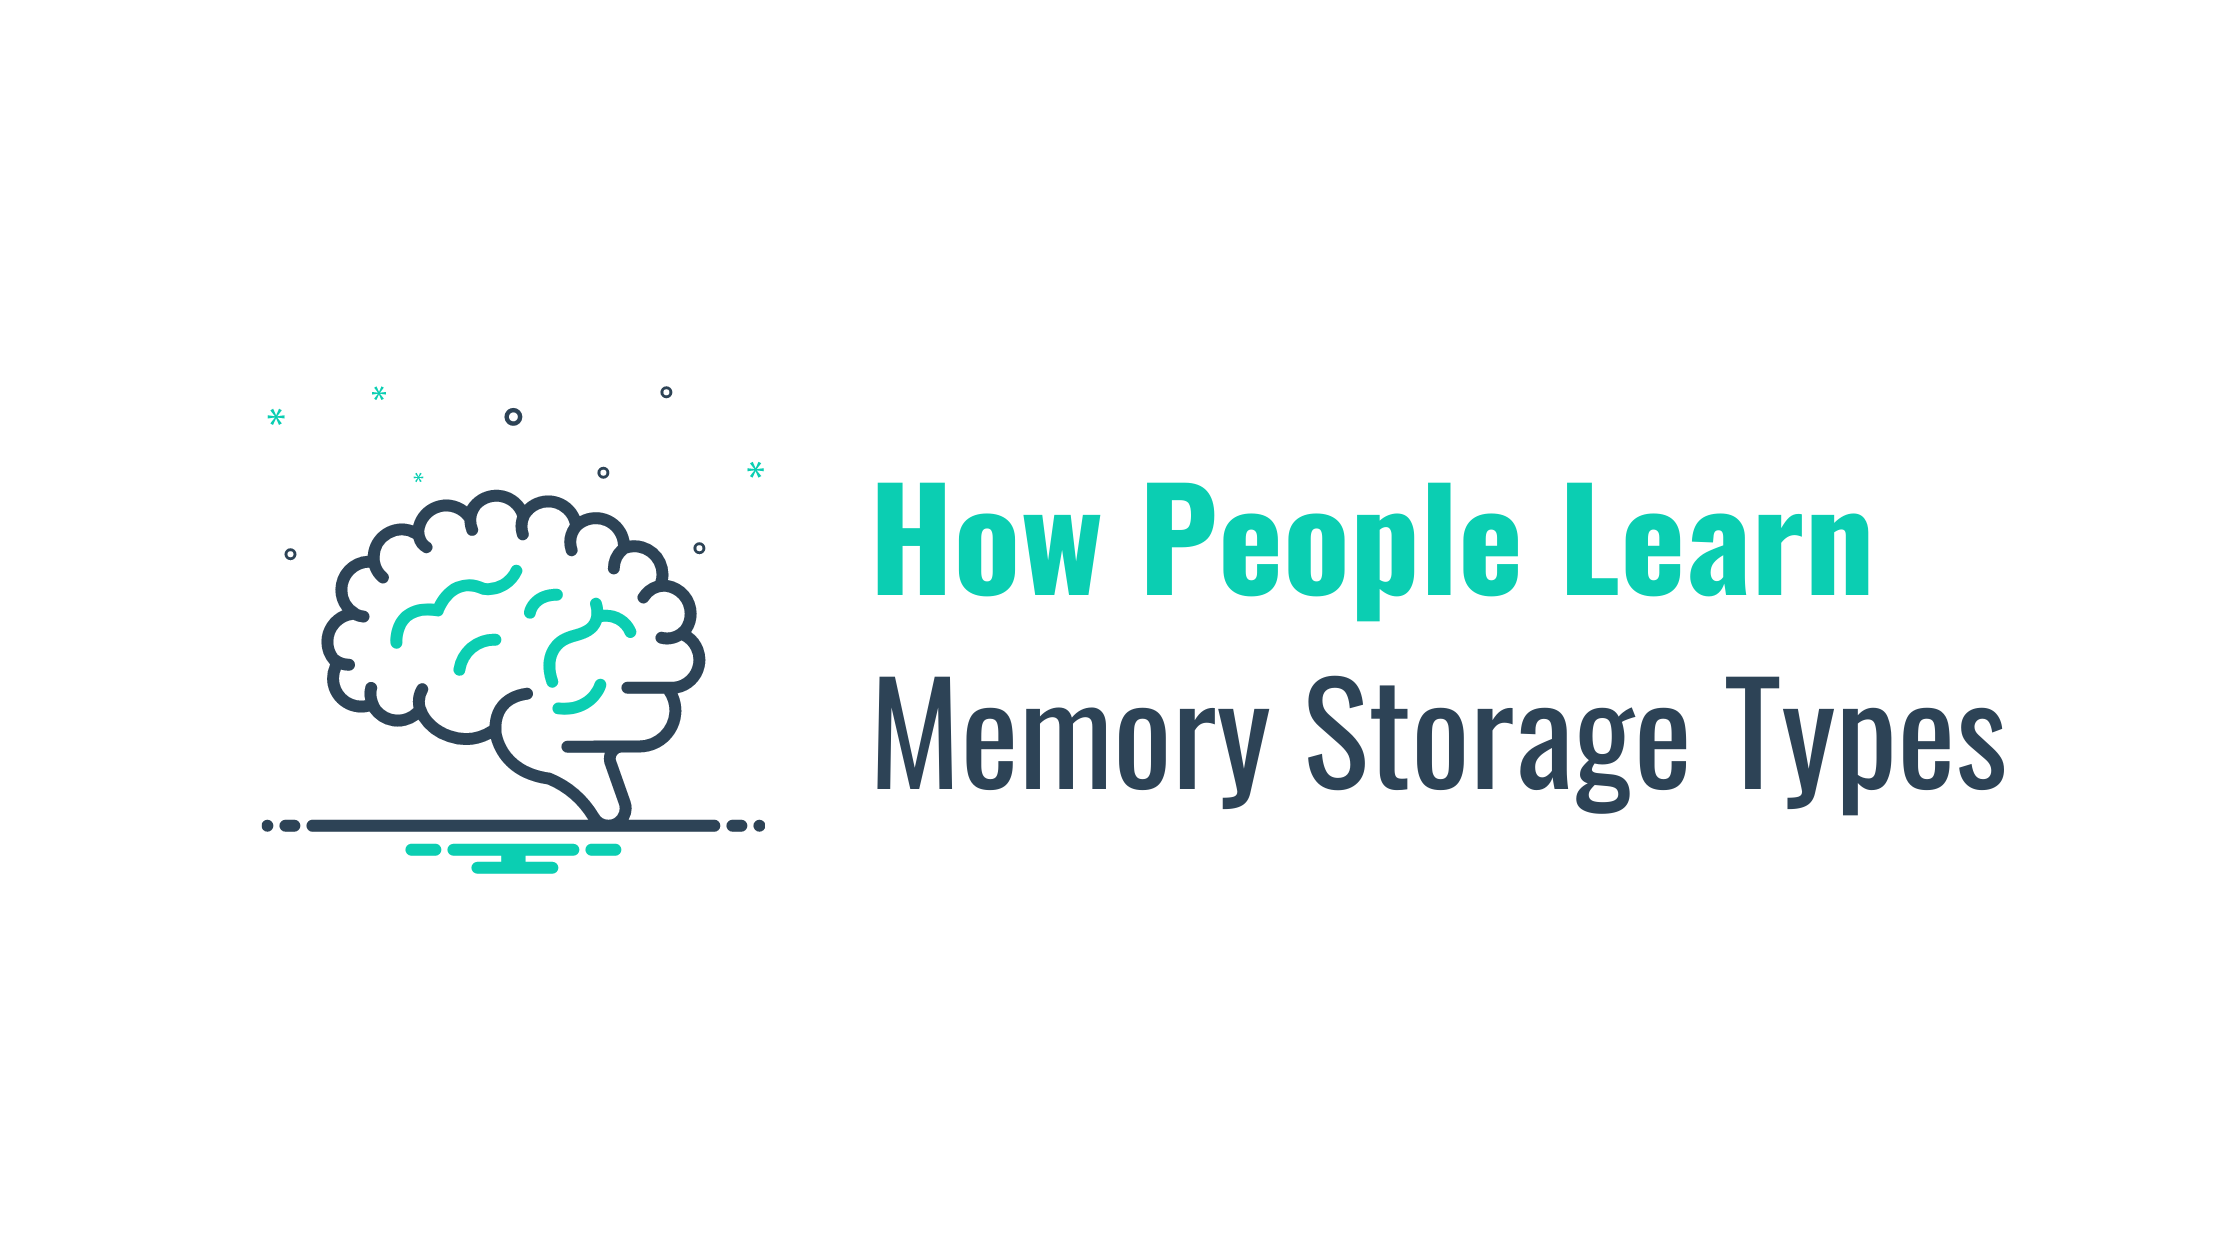 Memory Storage Types Cover